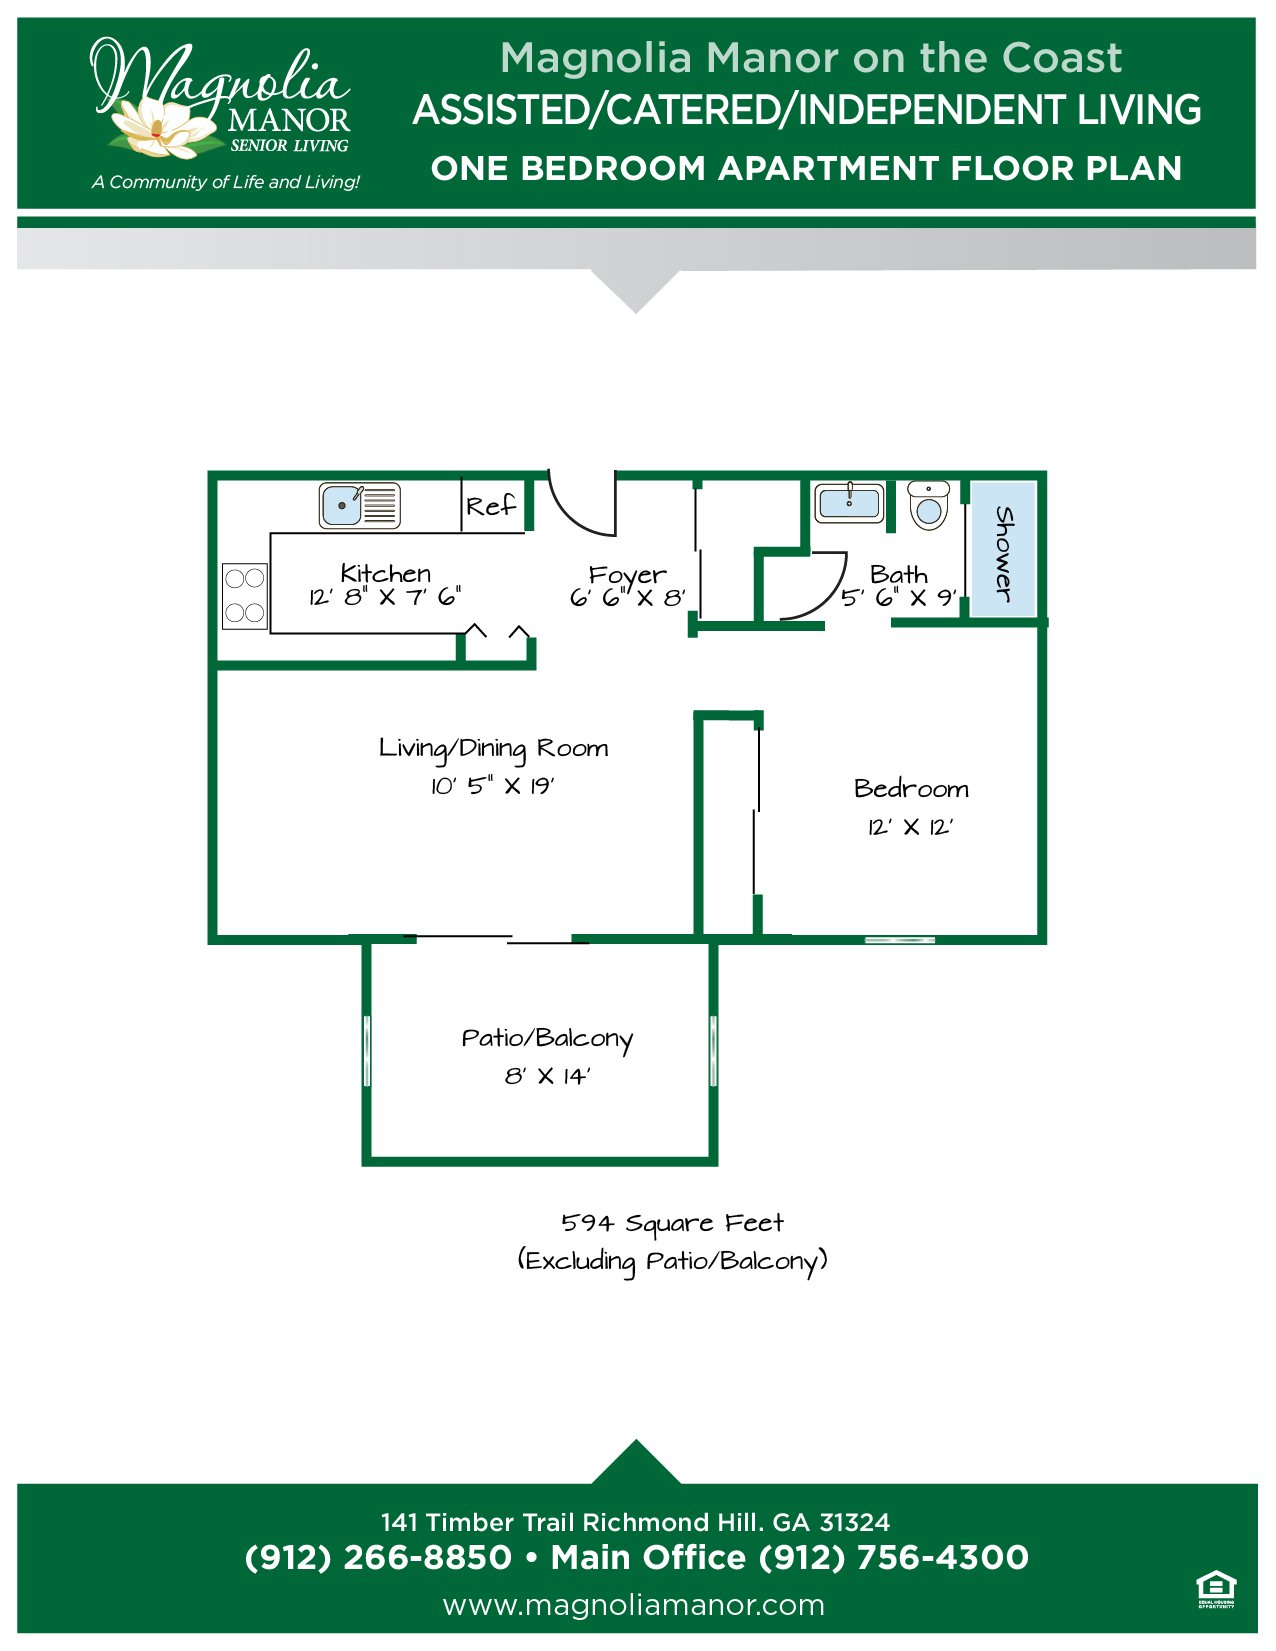 00344 Richmond Hill One Bedroom Apartments Floor Plans-01